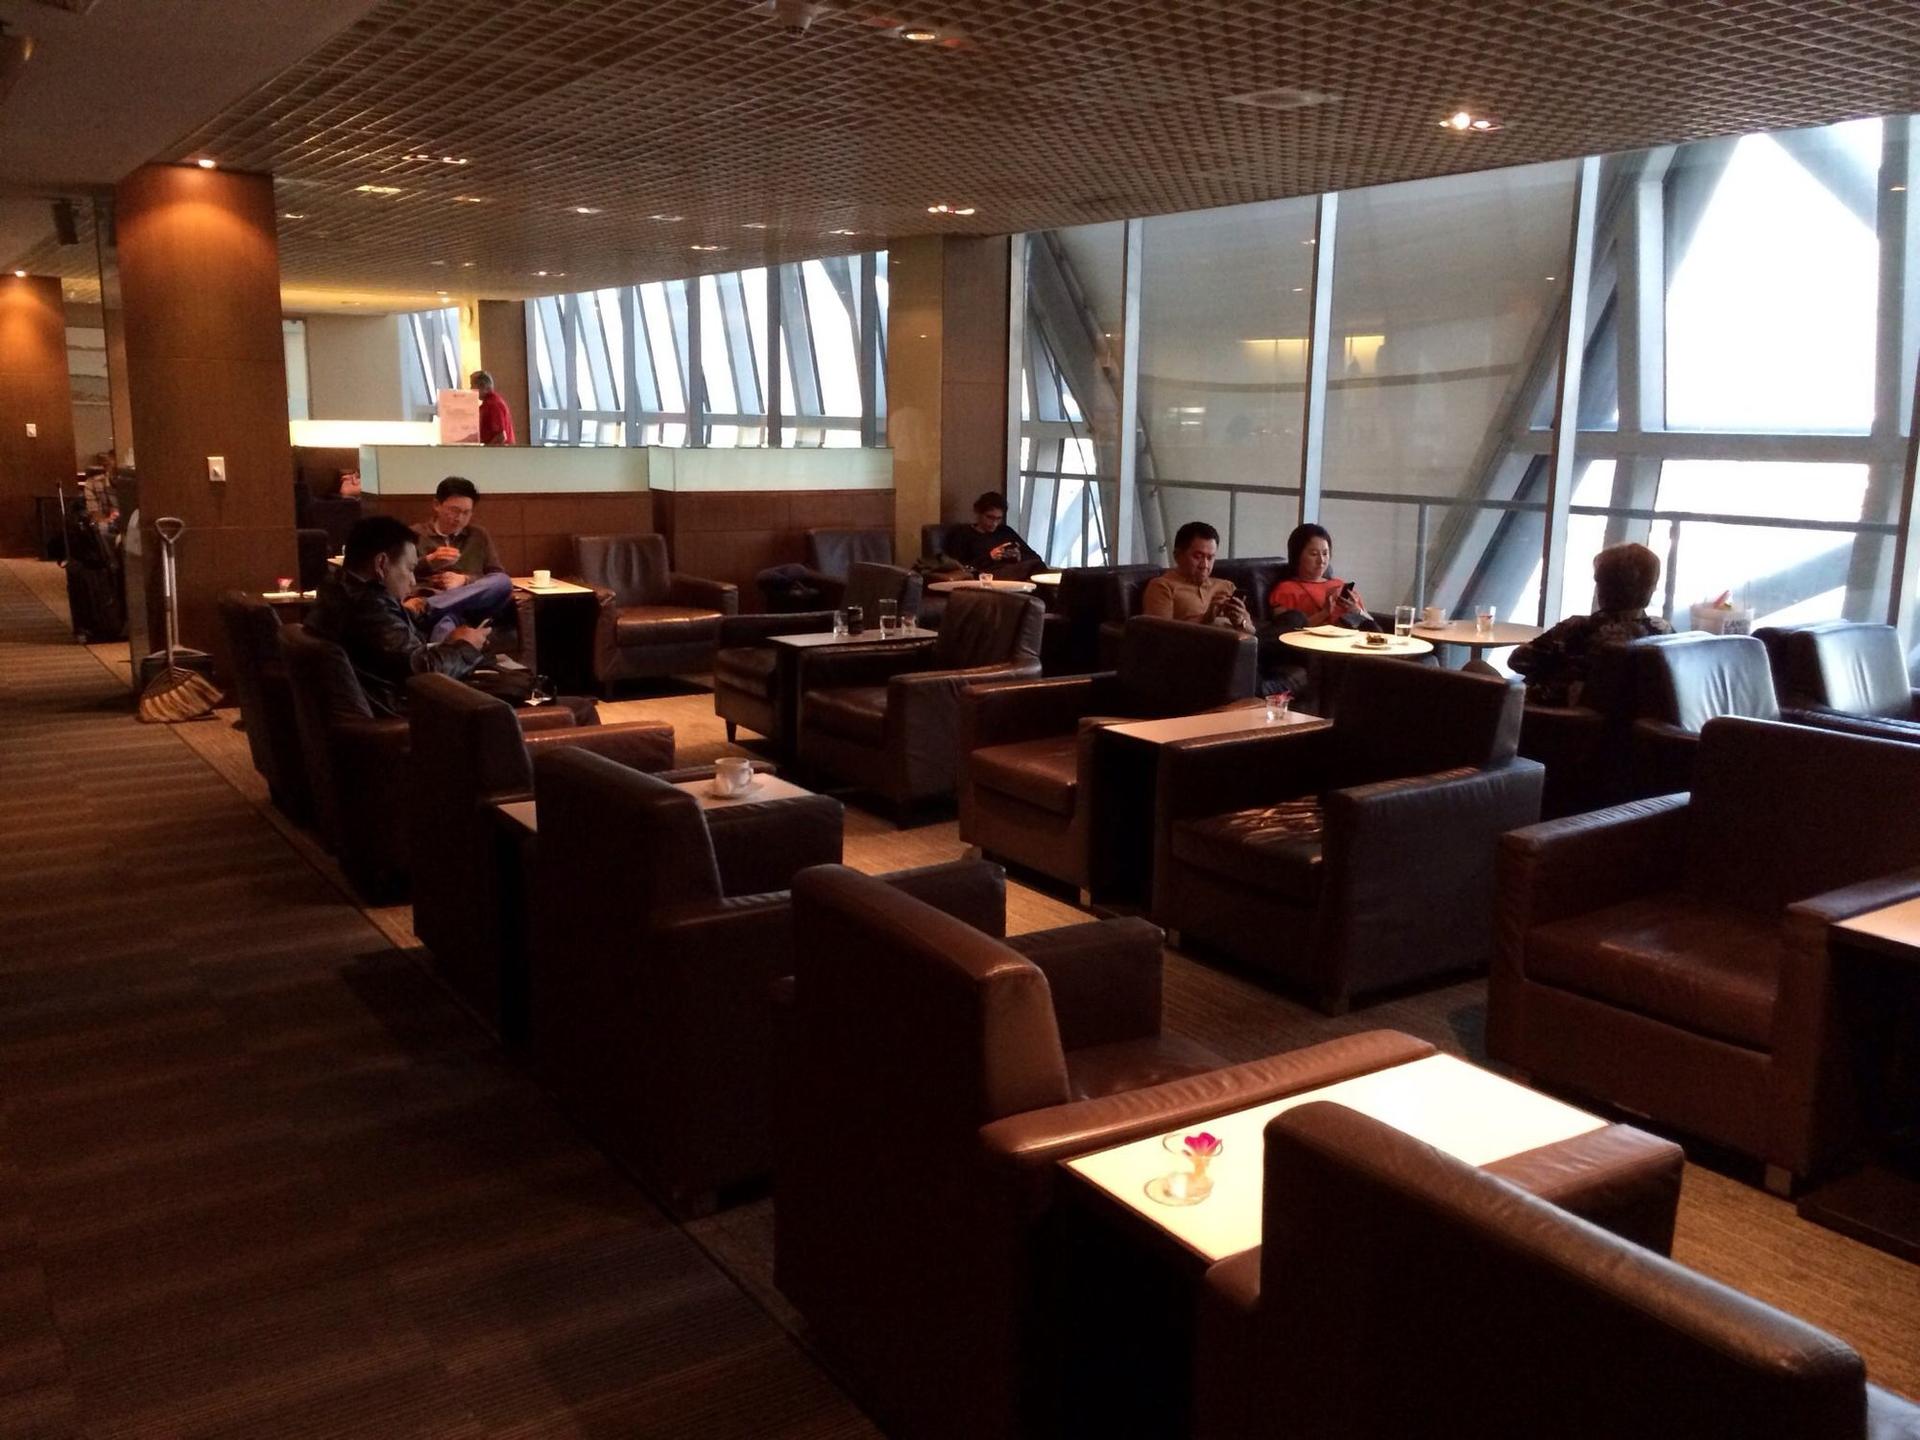 Thai Airways Royal Orchid Lounge image 4 of 15